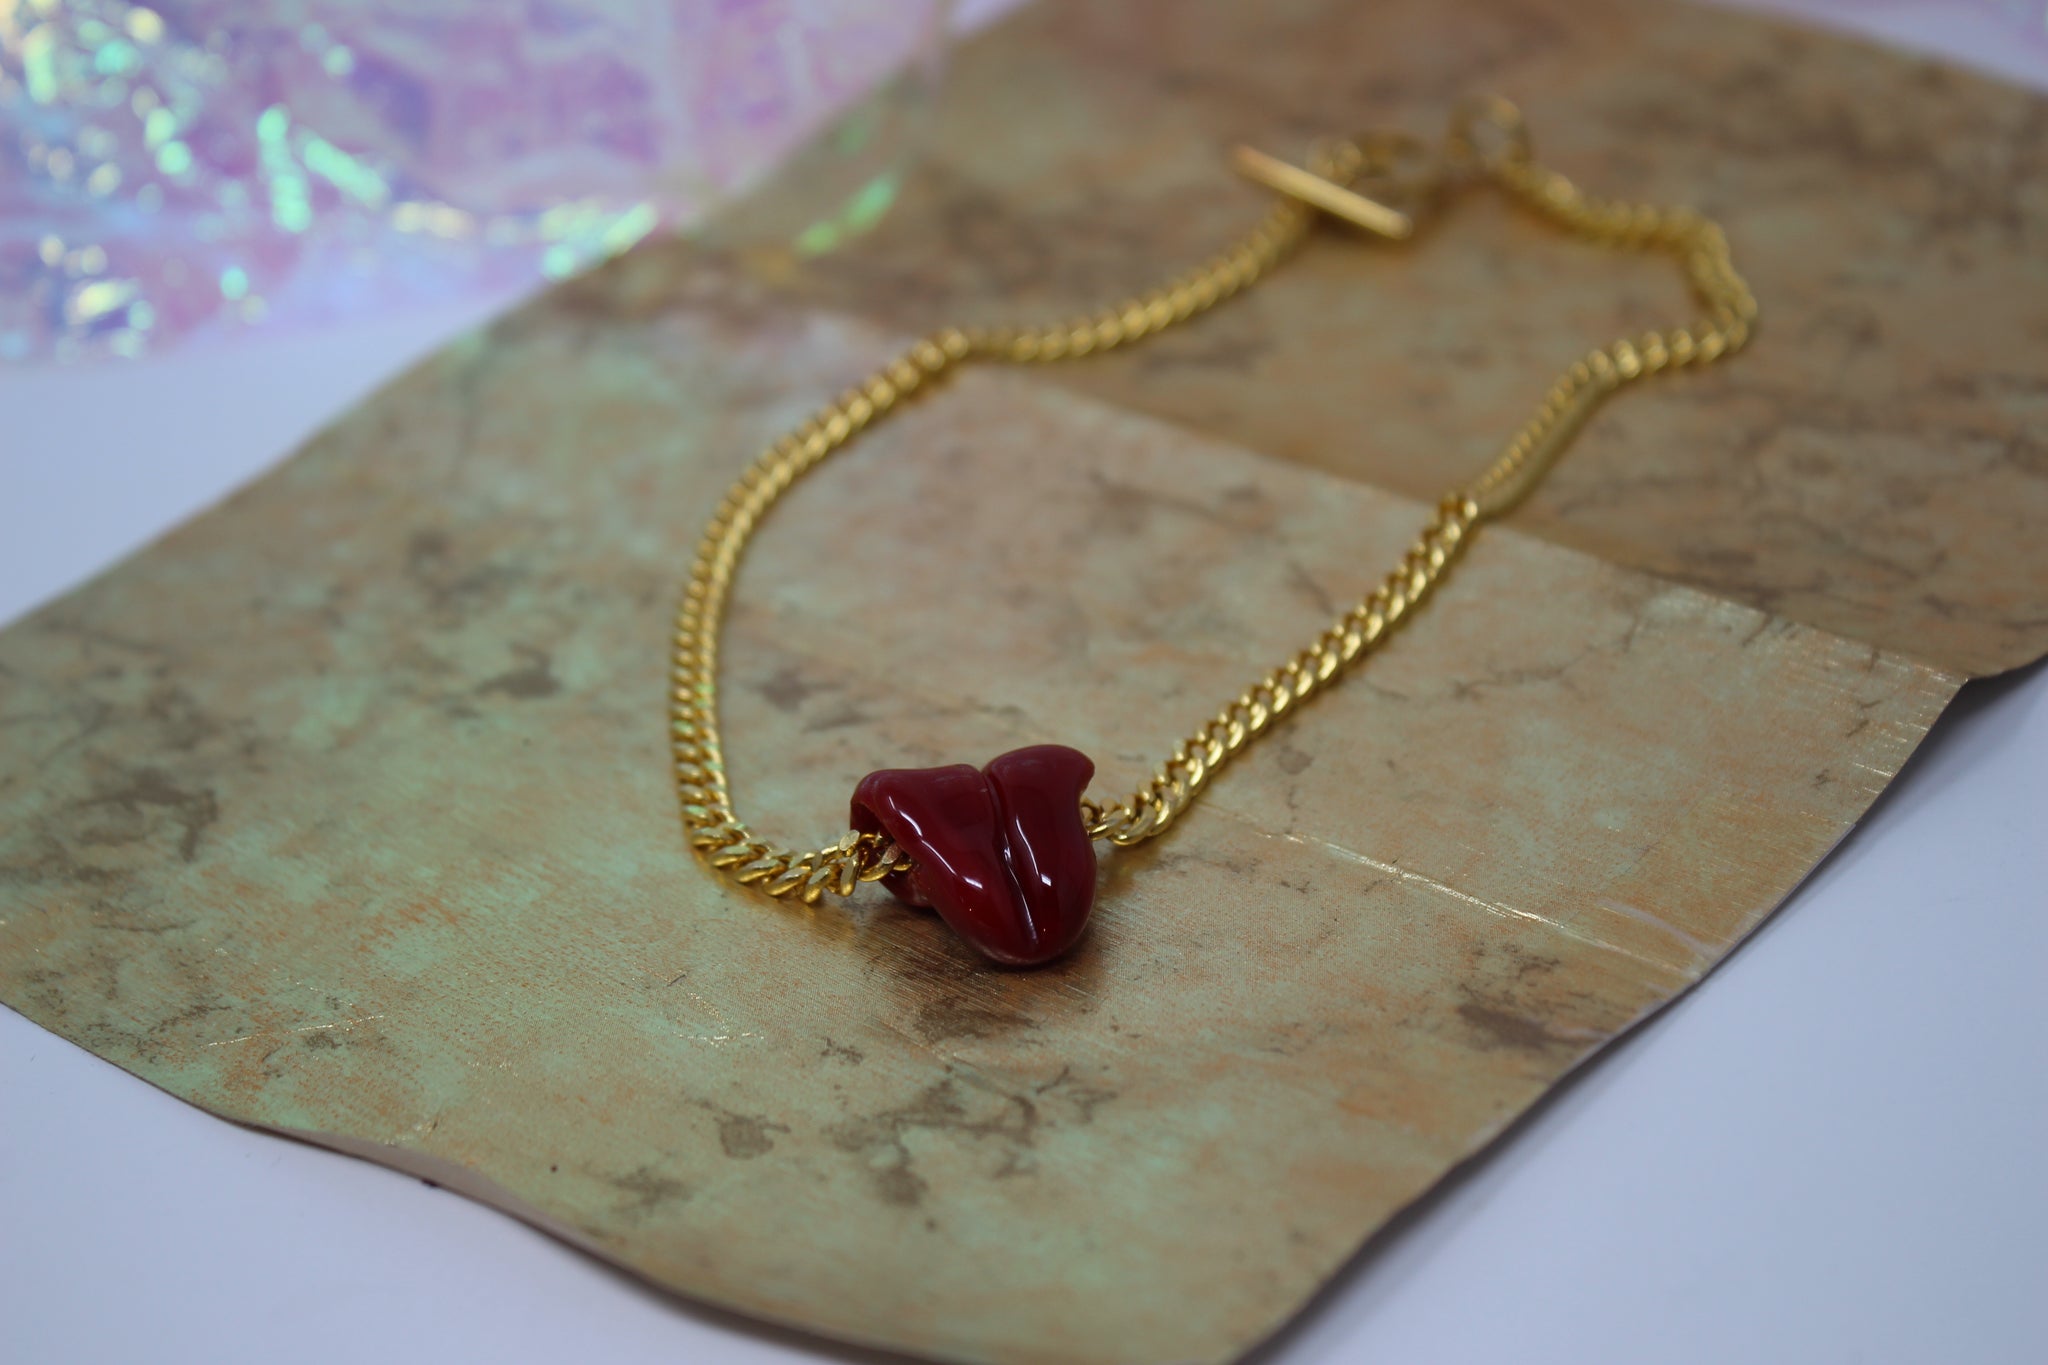 PRE-ORDER - Blowin' Raspberries - Glass Tongue (Pendant Only)